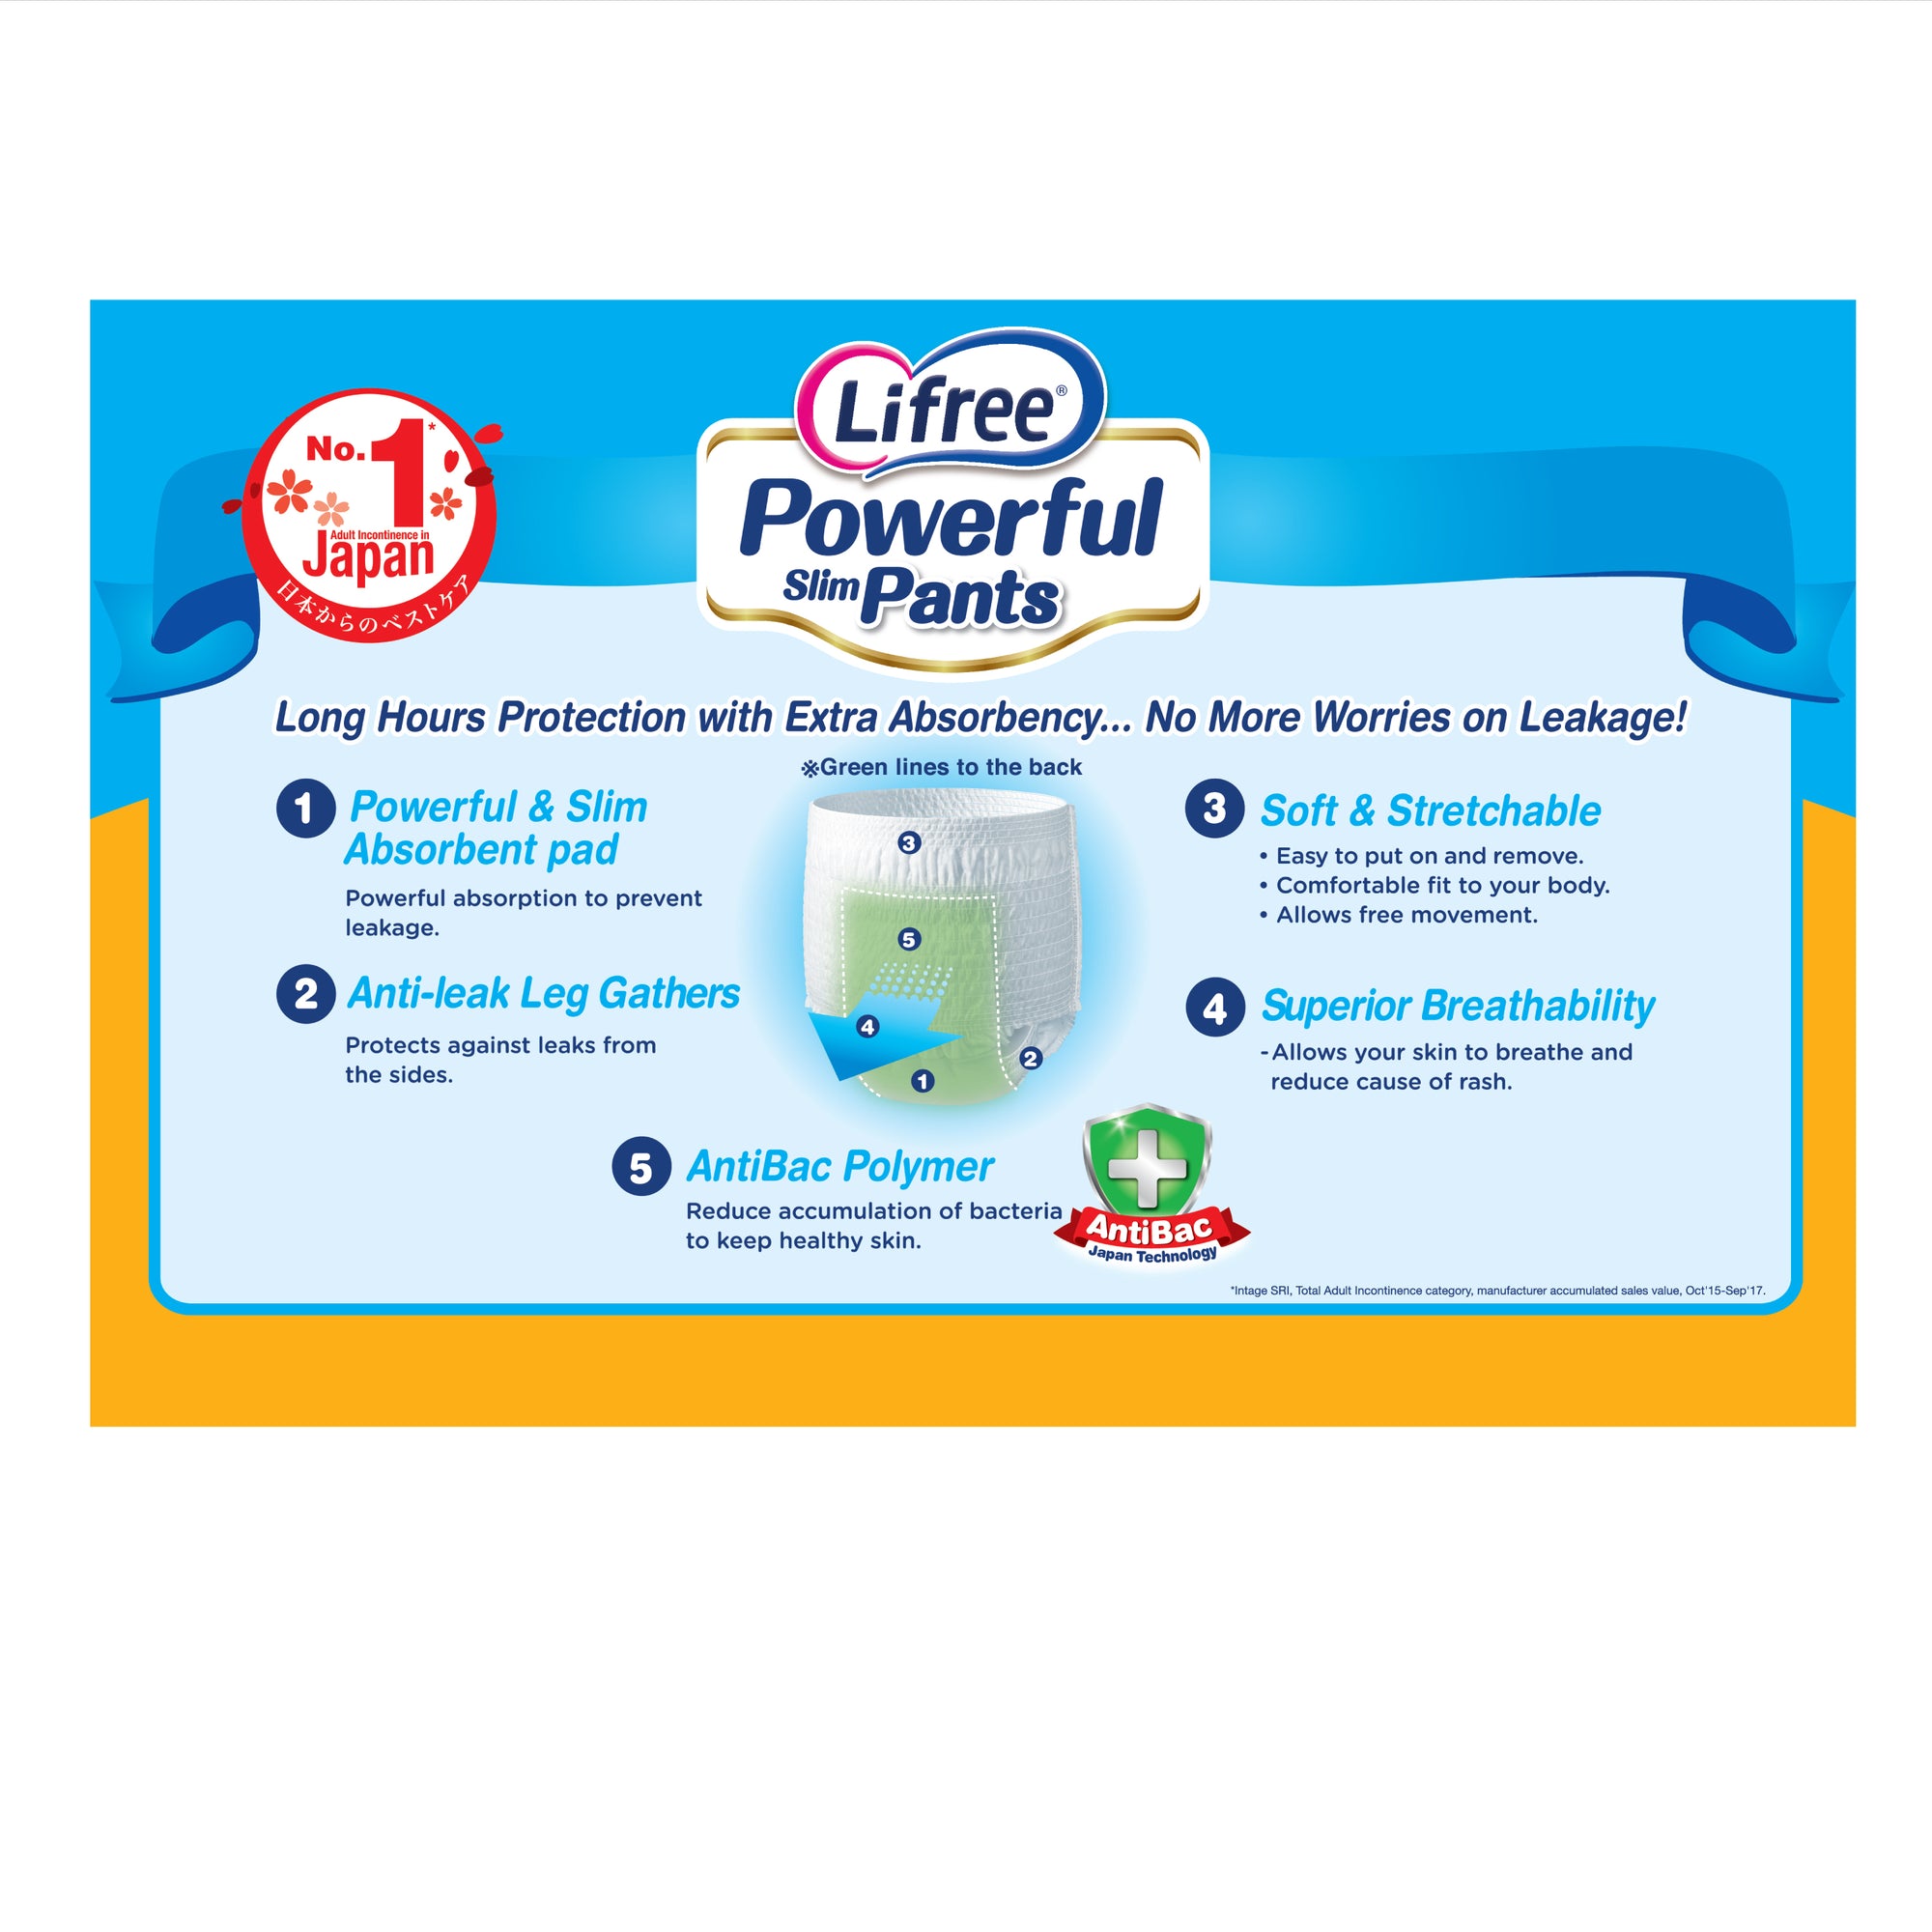 Lifree Extra Absorb Pants - Stay Worry-free & Confident! - YouTube